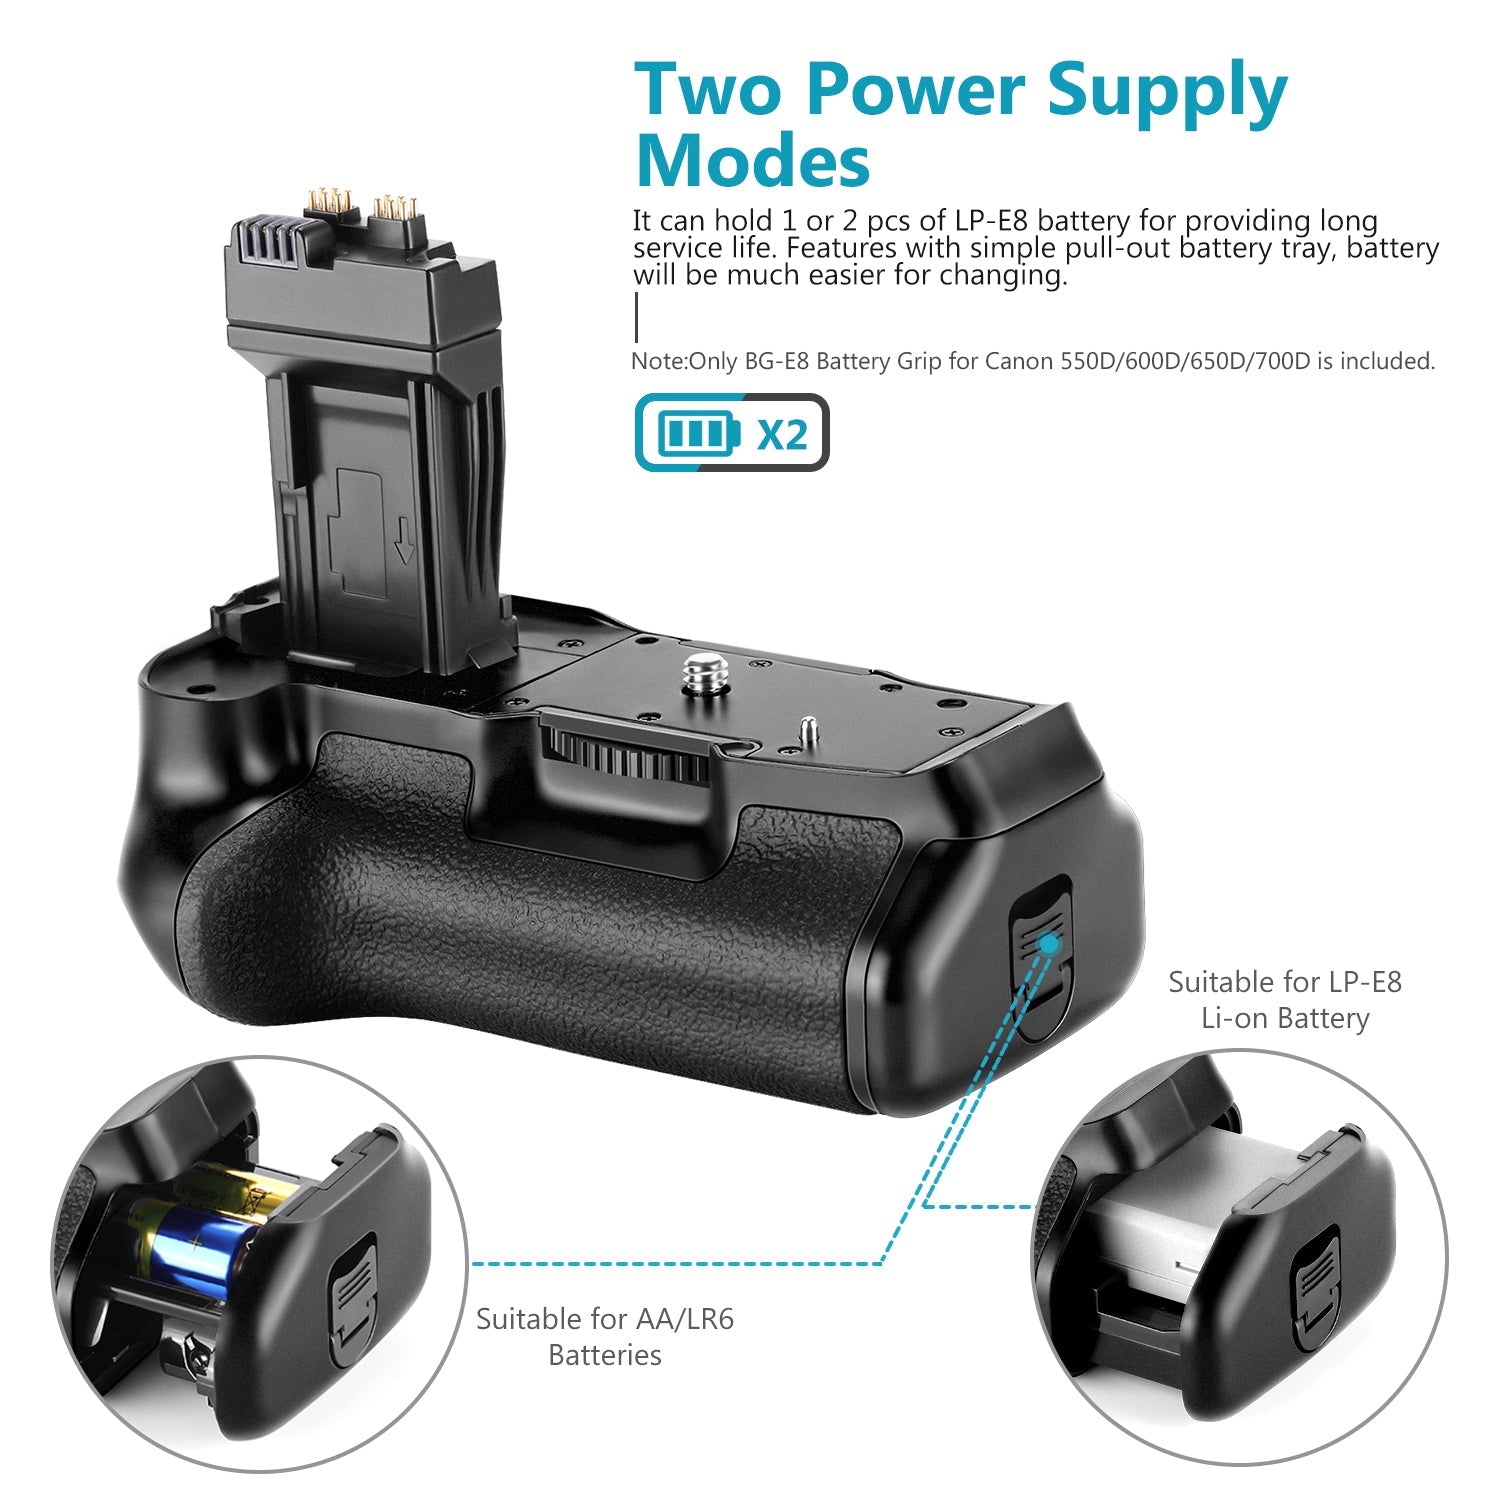 Neewer BG-E8 Replacement Battery Grip for Canon EOS 550D 600D 650D 700D/ Rebel T2i T3i T4i T5i SLR Cameras - neewer.com